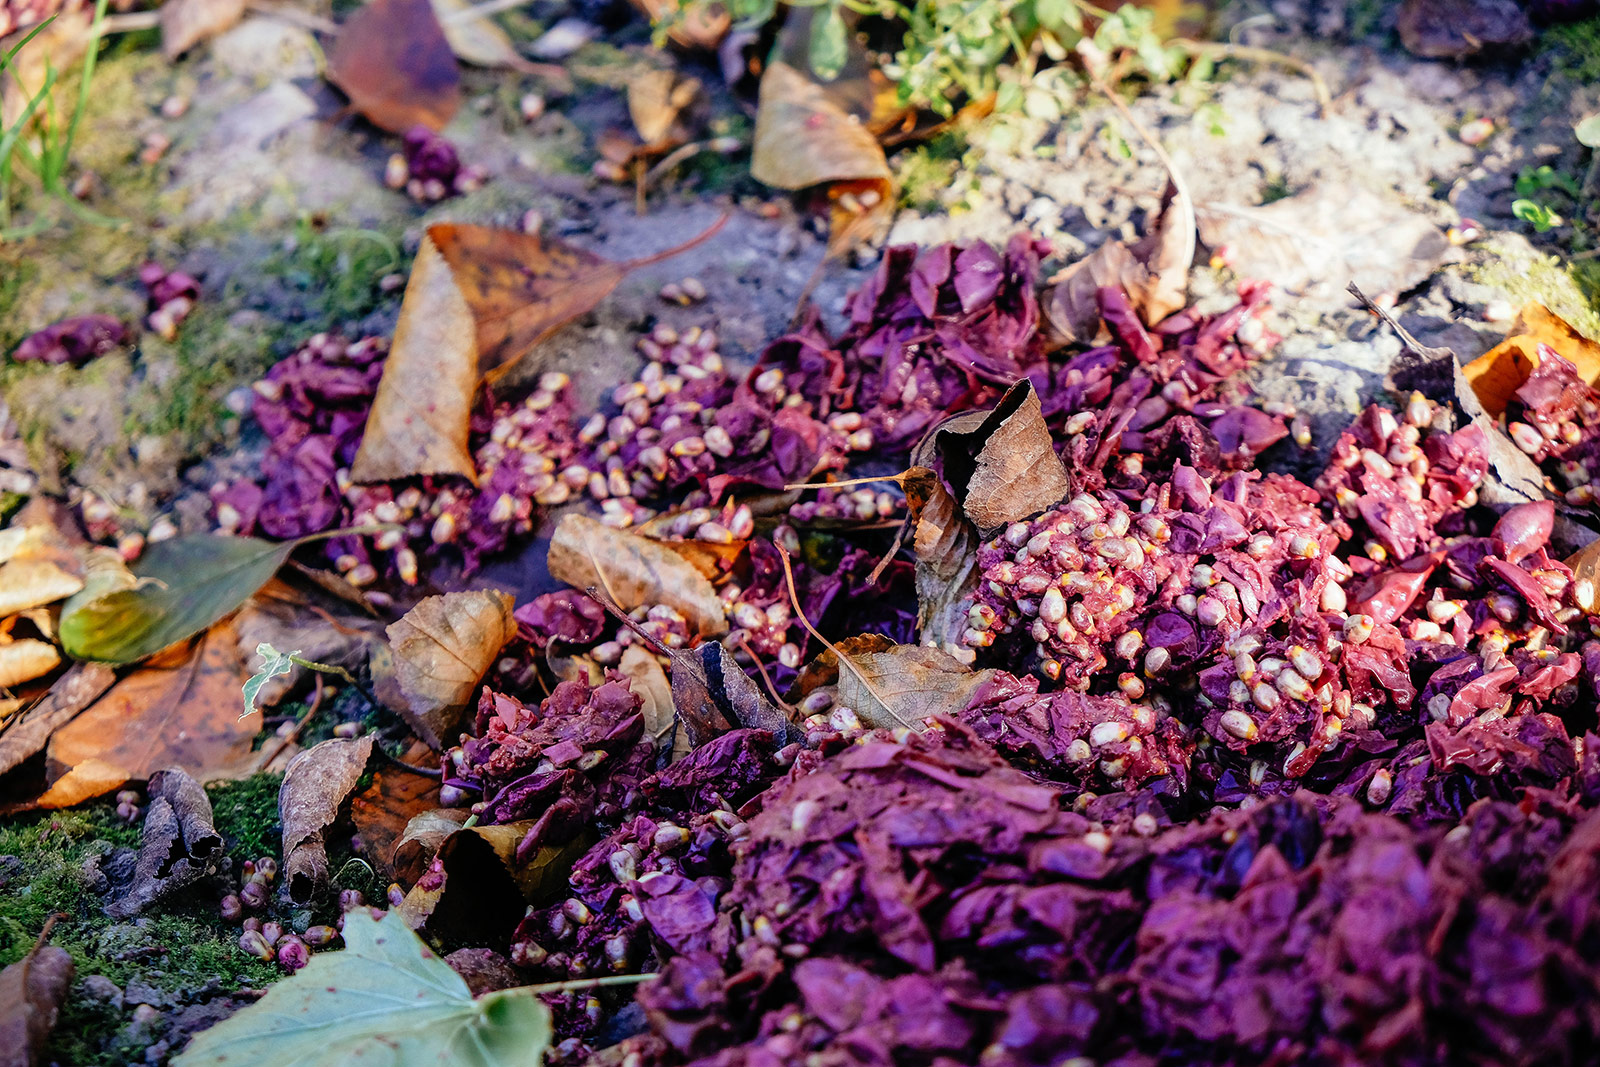 Close-up of compost in the yard, including pomace (wine grape waste) and dried leaves